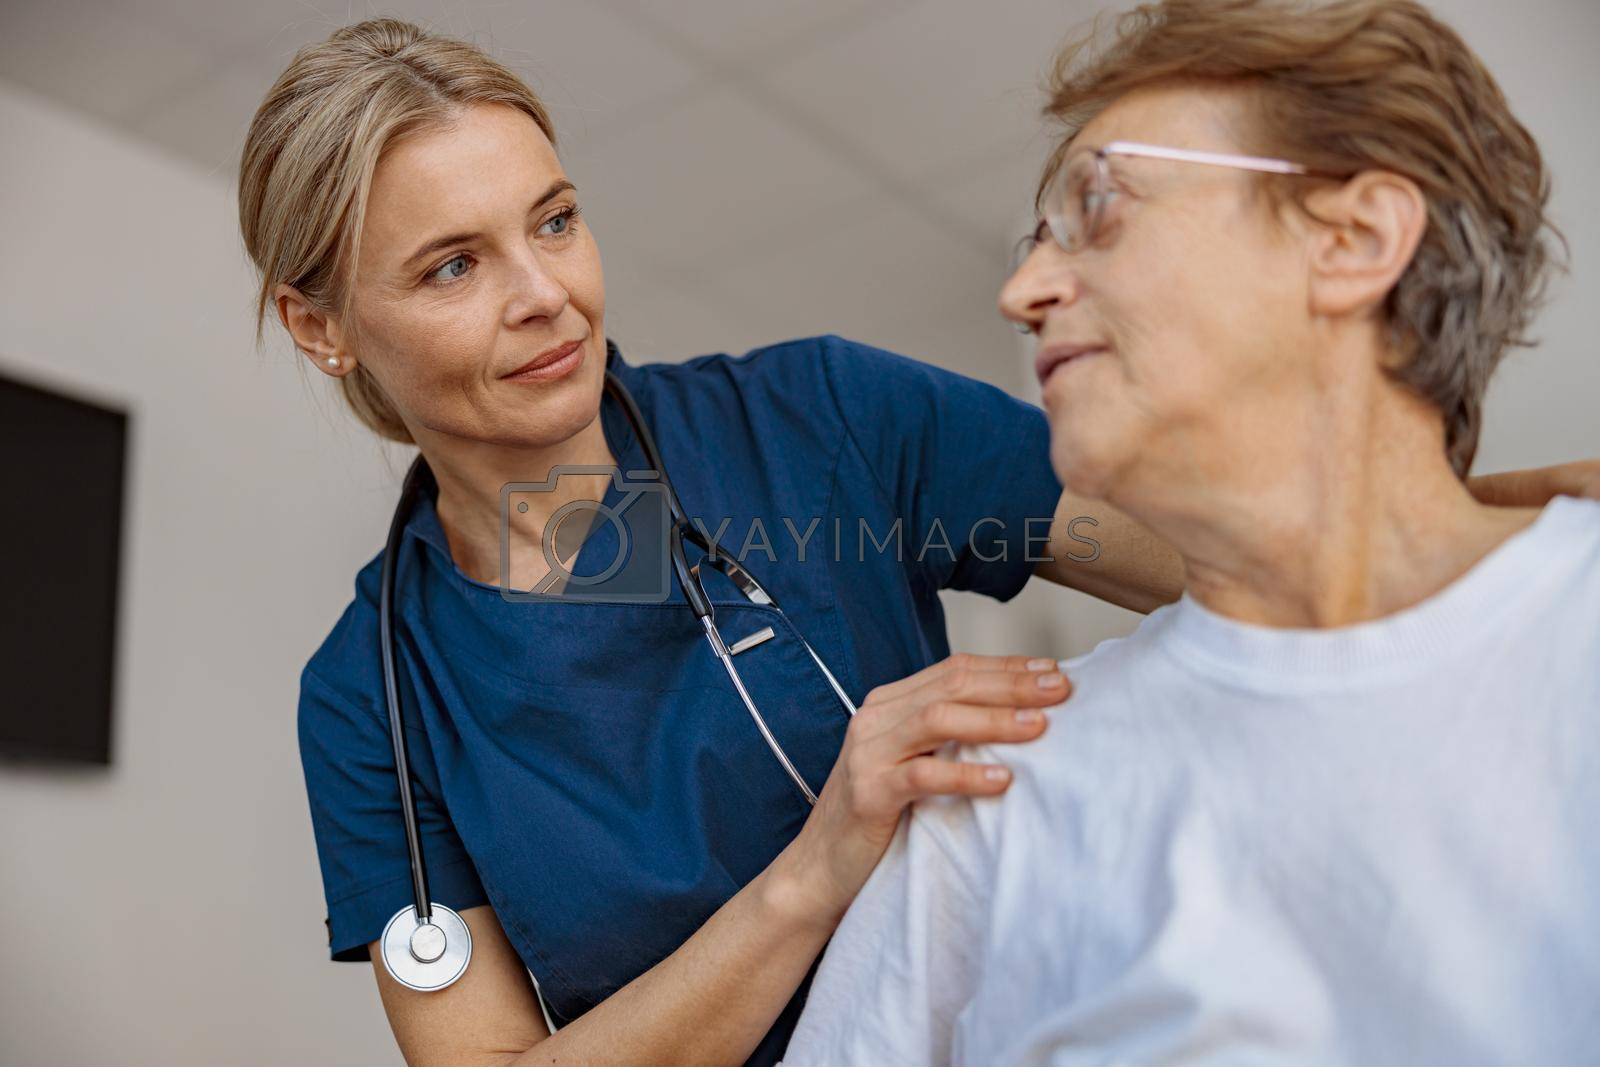 Royalty free image of Doctor supporting a sick patient before medical procedures in a hospital room by Yaroslav_astakhov